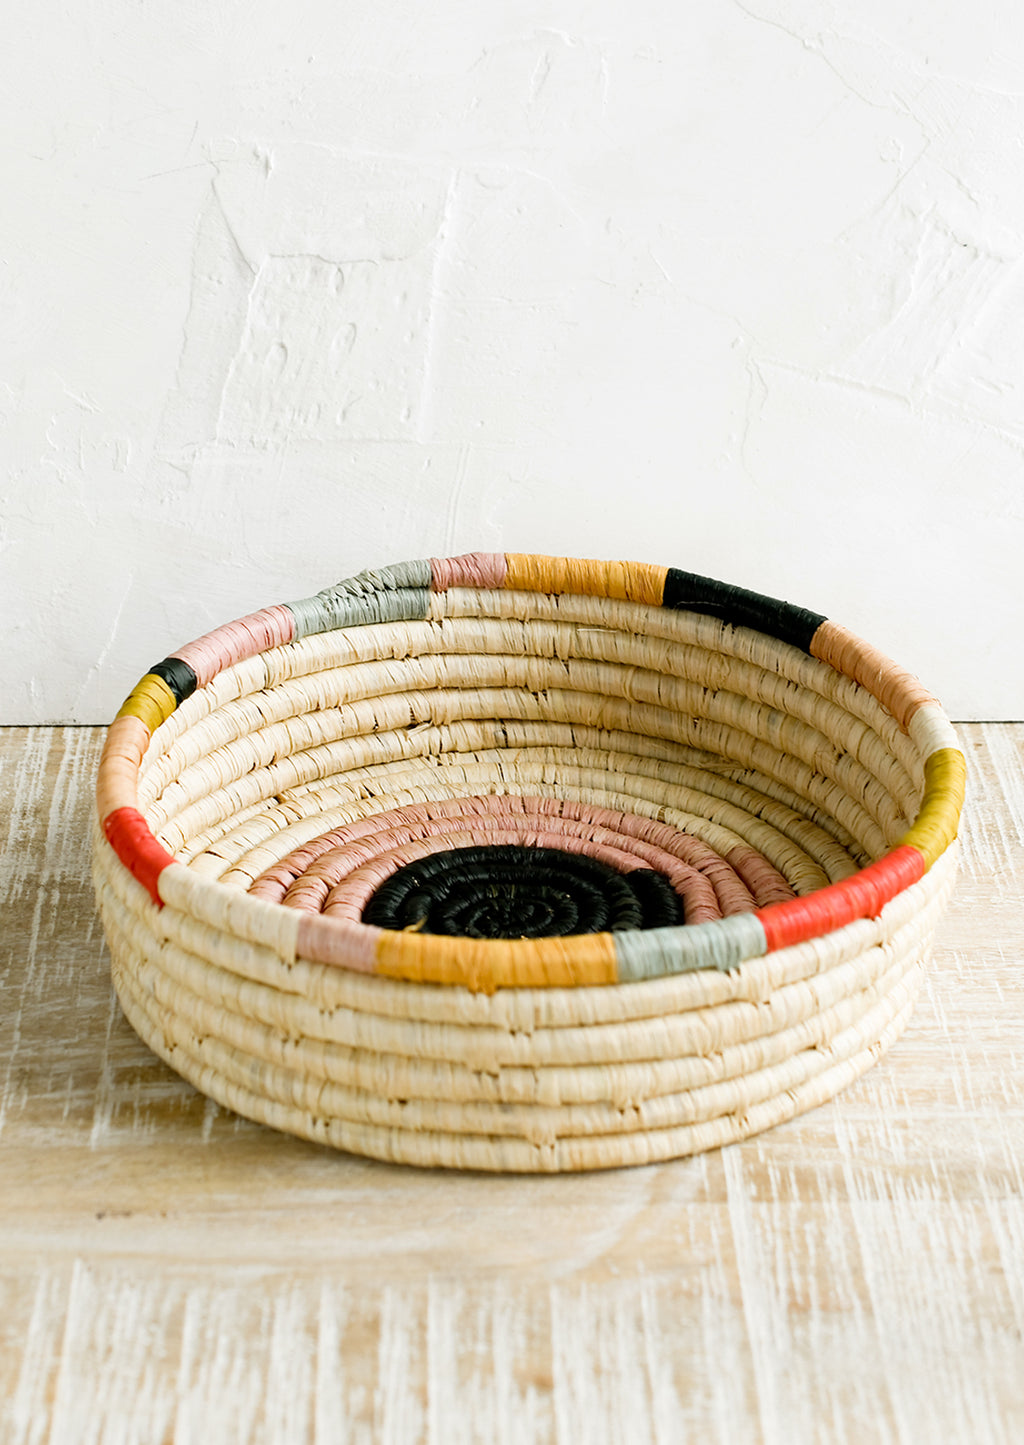 2: A round, shallow basket in colorful design.